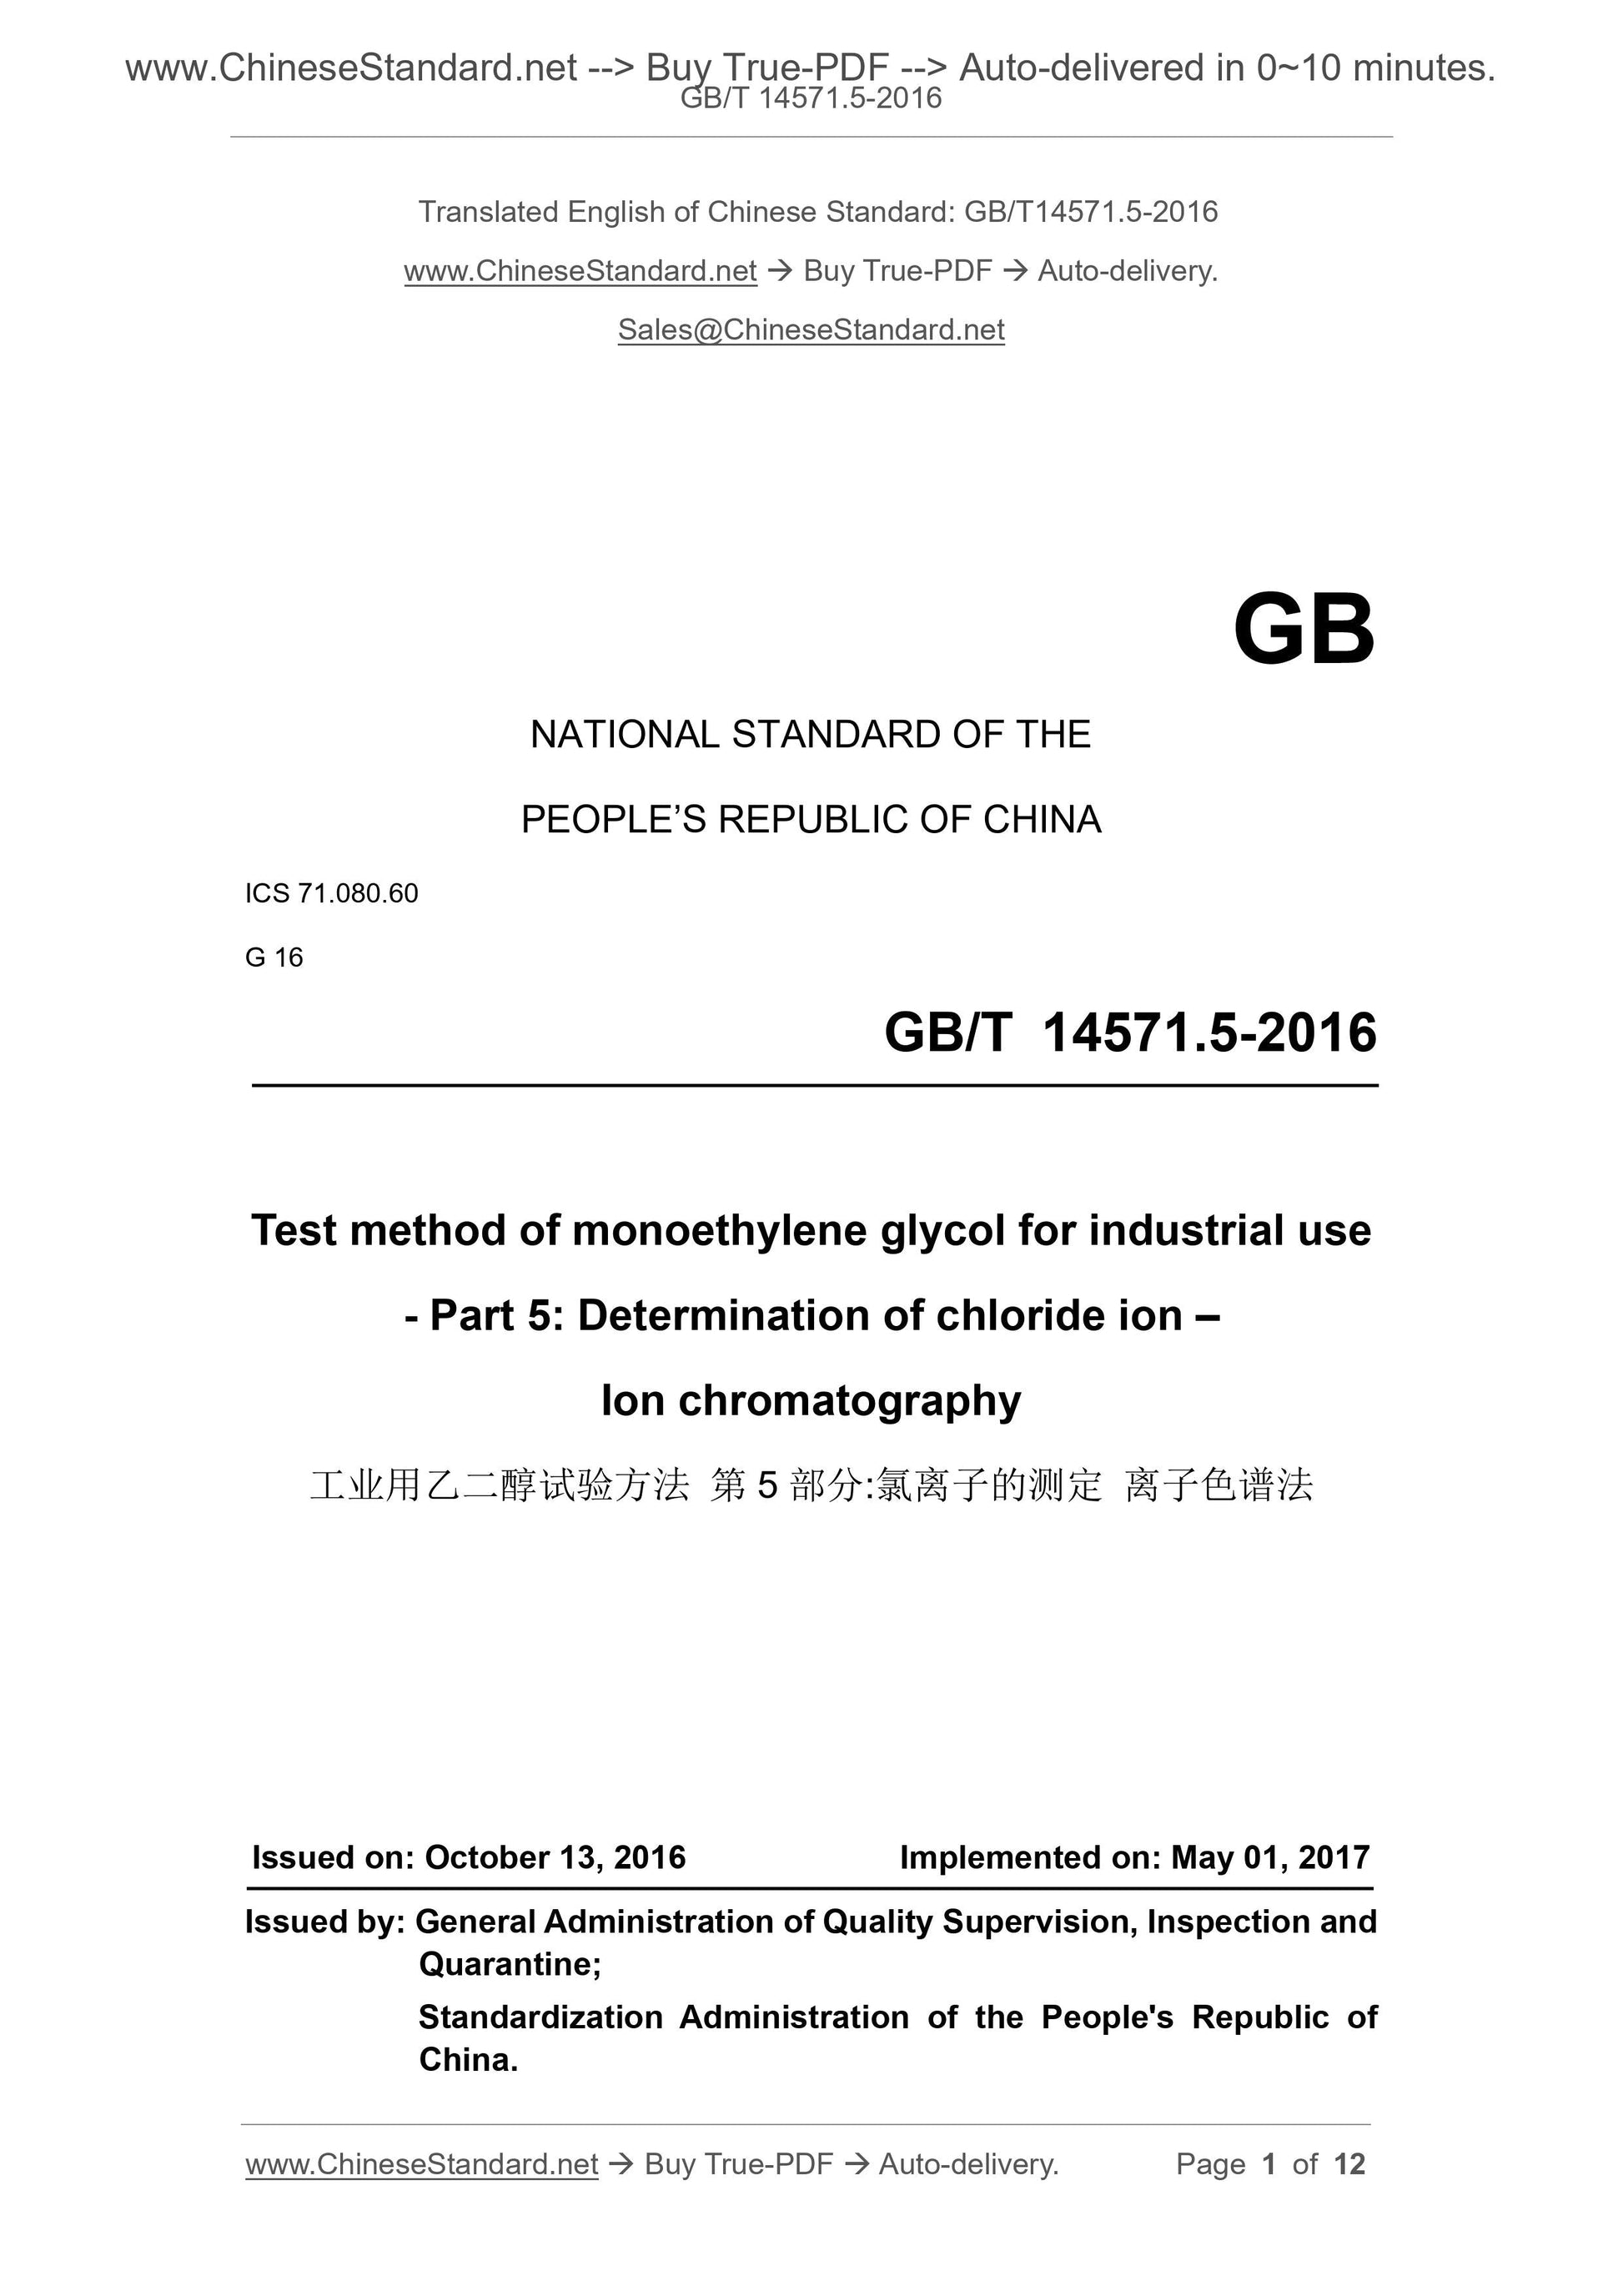 GB/T 14571.5-2016 Page 1